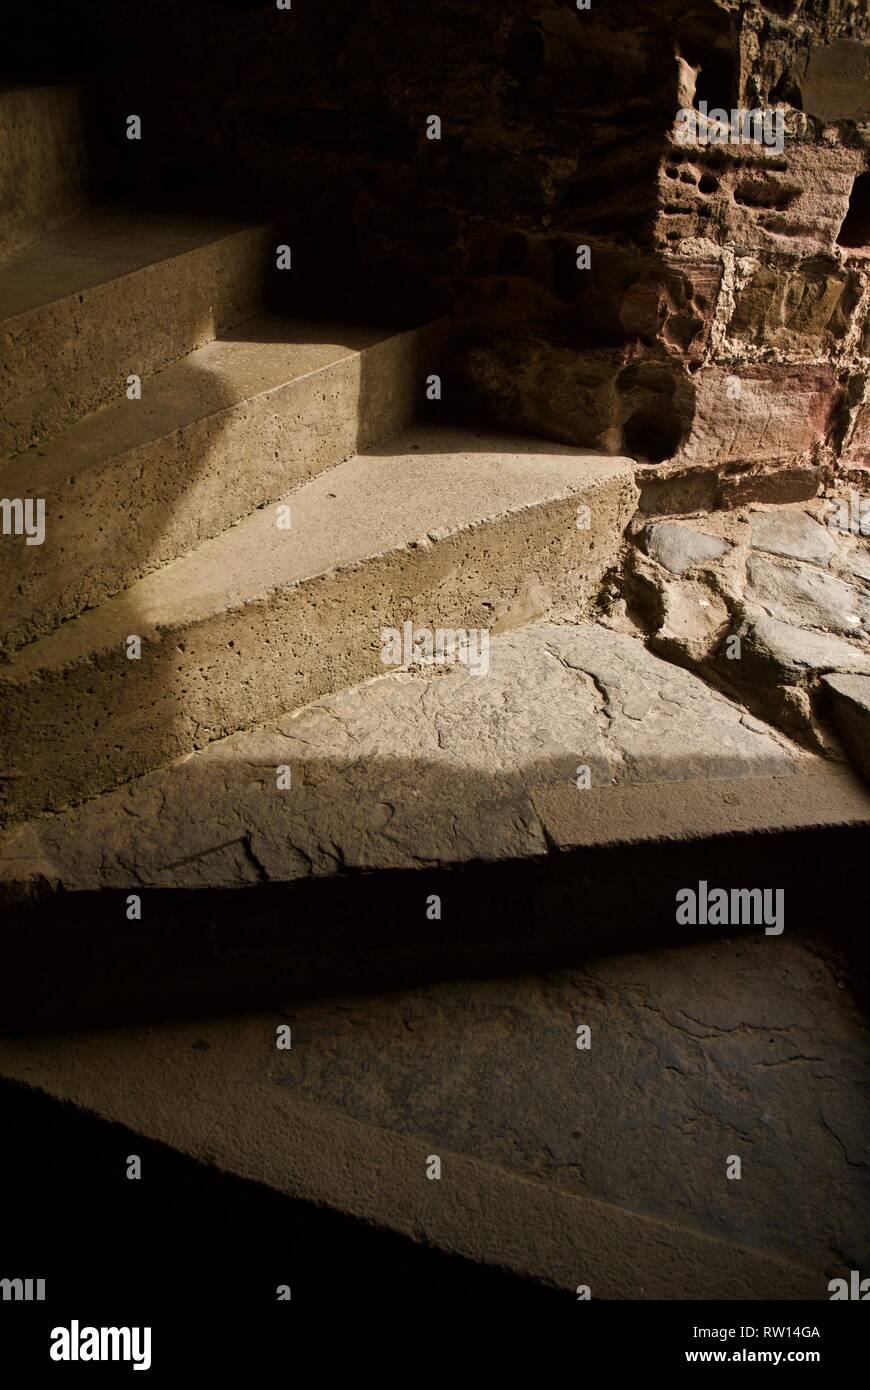 A study of spiral steps inside one of the towers of Conwy Castle, Conwy, North Wales, UK Stock Photo